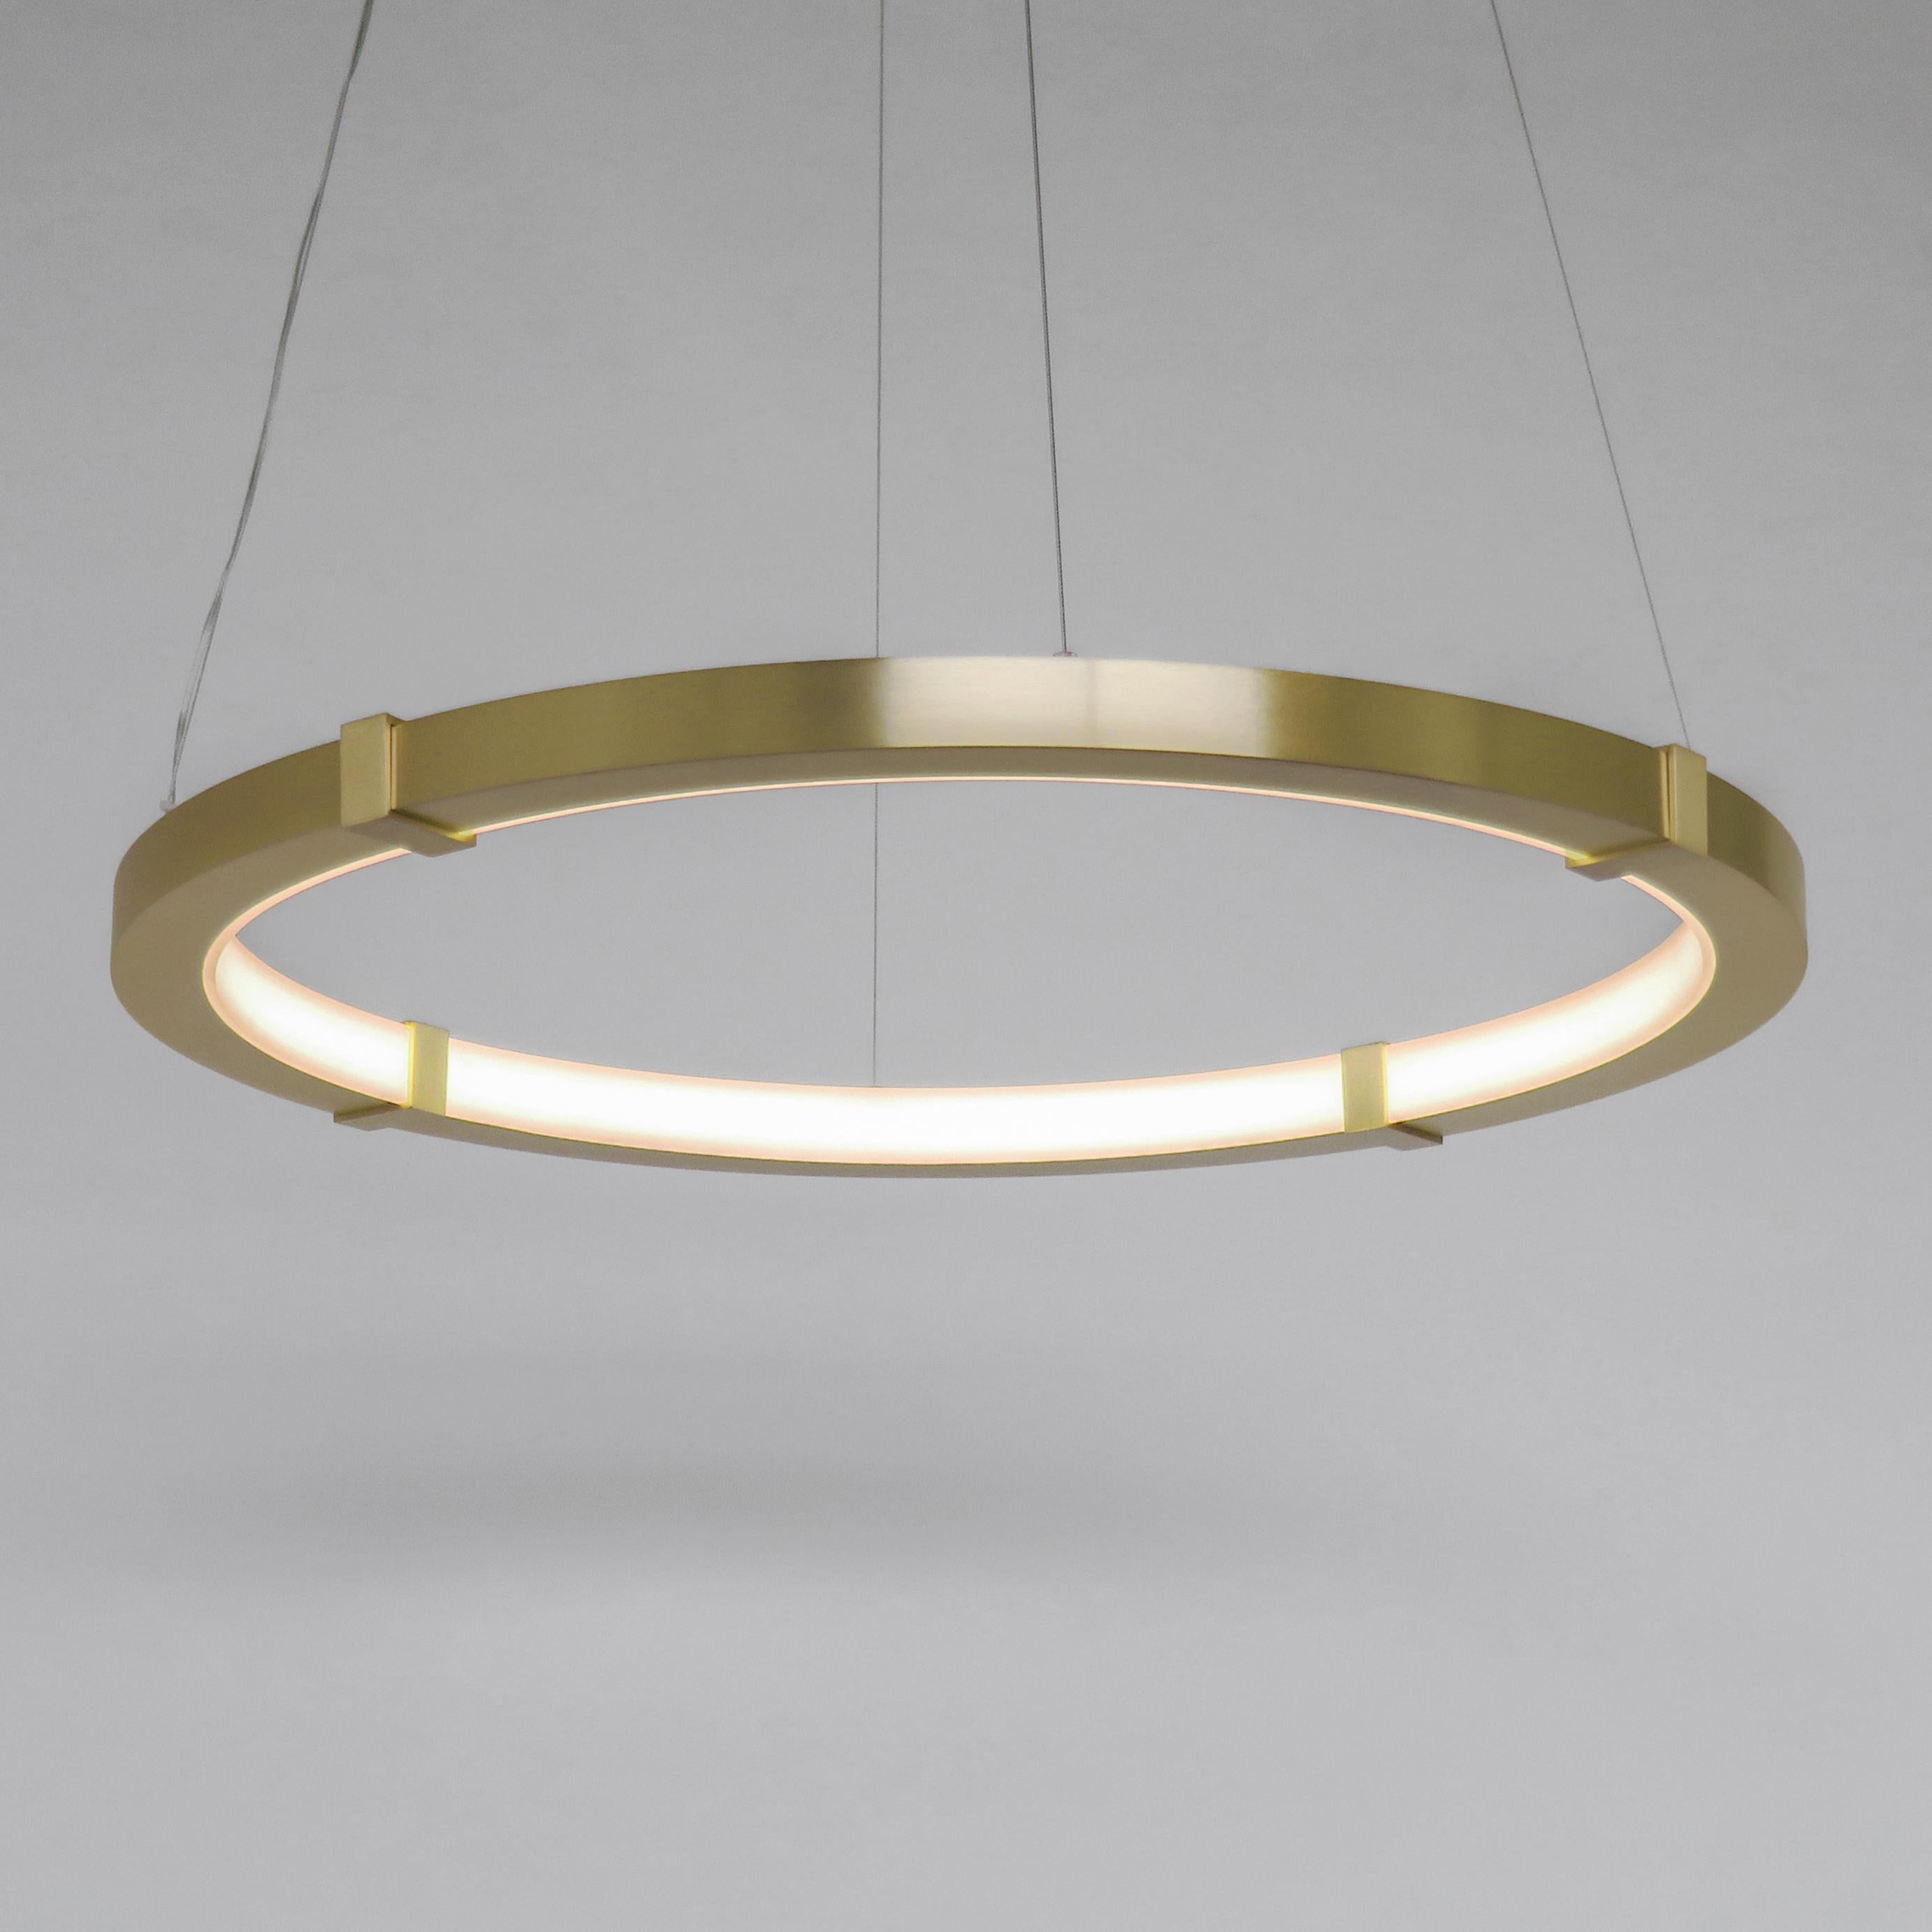 The Aura Slim pendant emits an elegant glow that is diffused by a minimal satin white acrylic inner ring. The outer ring is composed of cold-rolled steel and can be finished in plated or powder coat options. The Aura Slim Pendant works beautifully